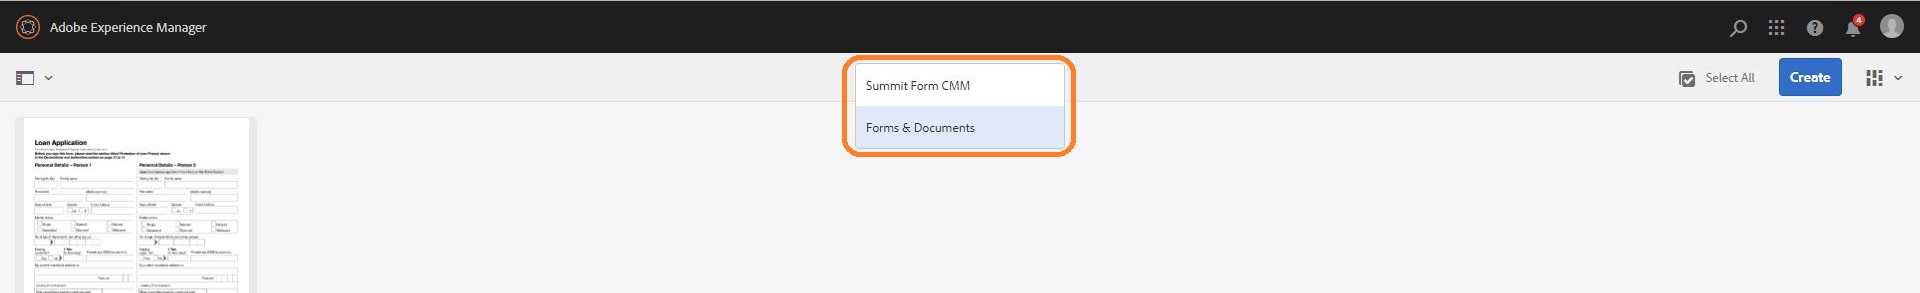 Navigate to Forms & Documents